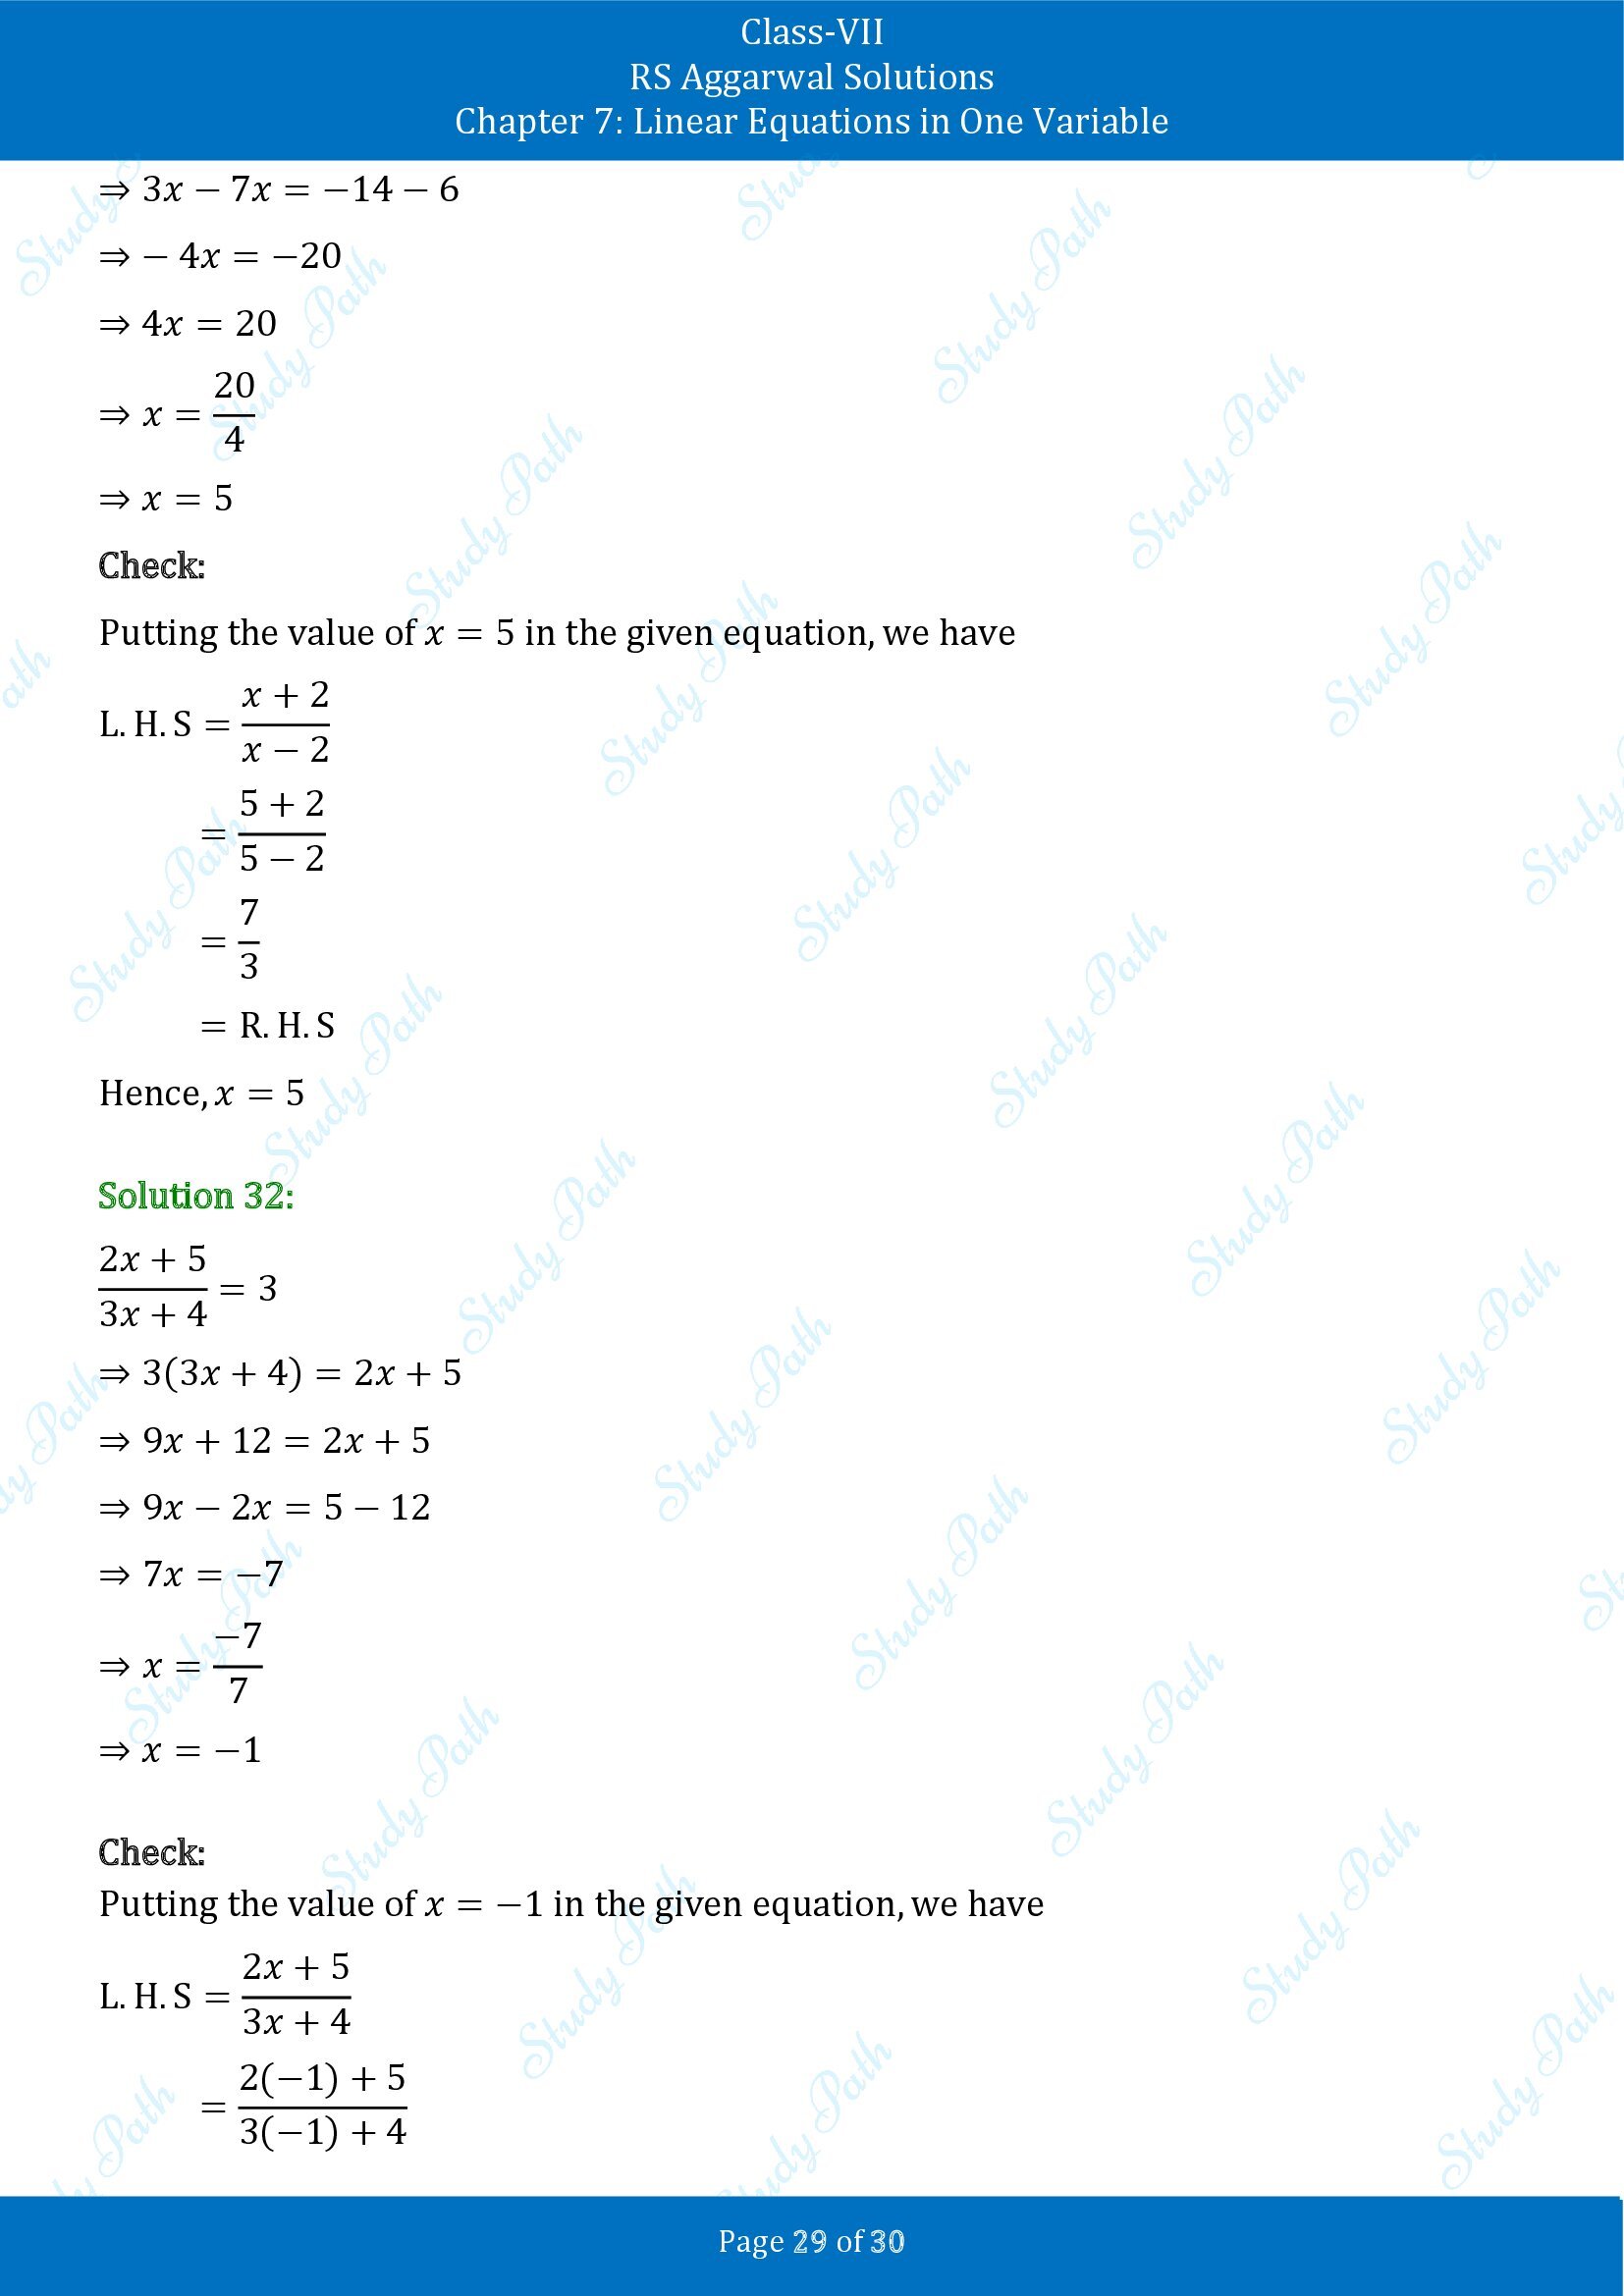 RS Aggarwal Solutions Class 7 Chapter 7 Linear Equations in One Variable Exercise 7A 00029